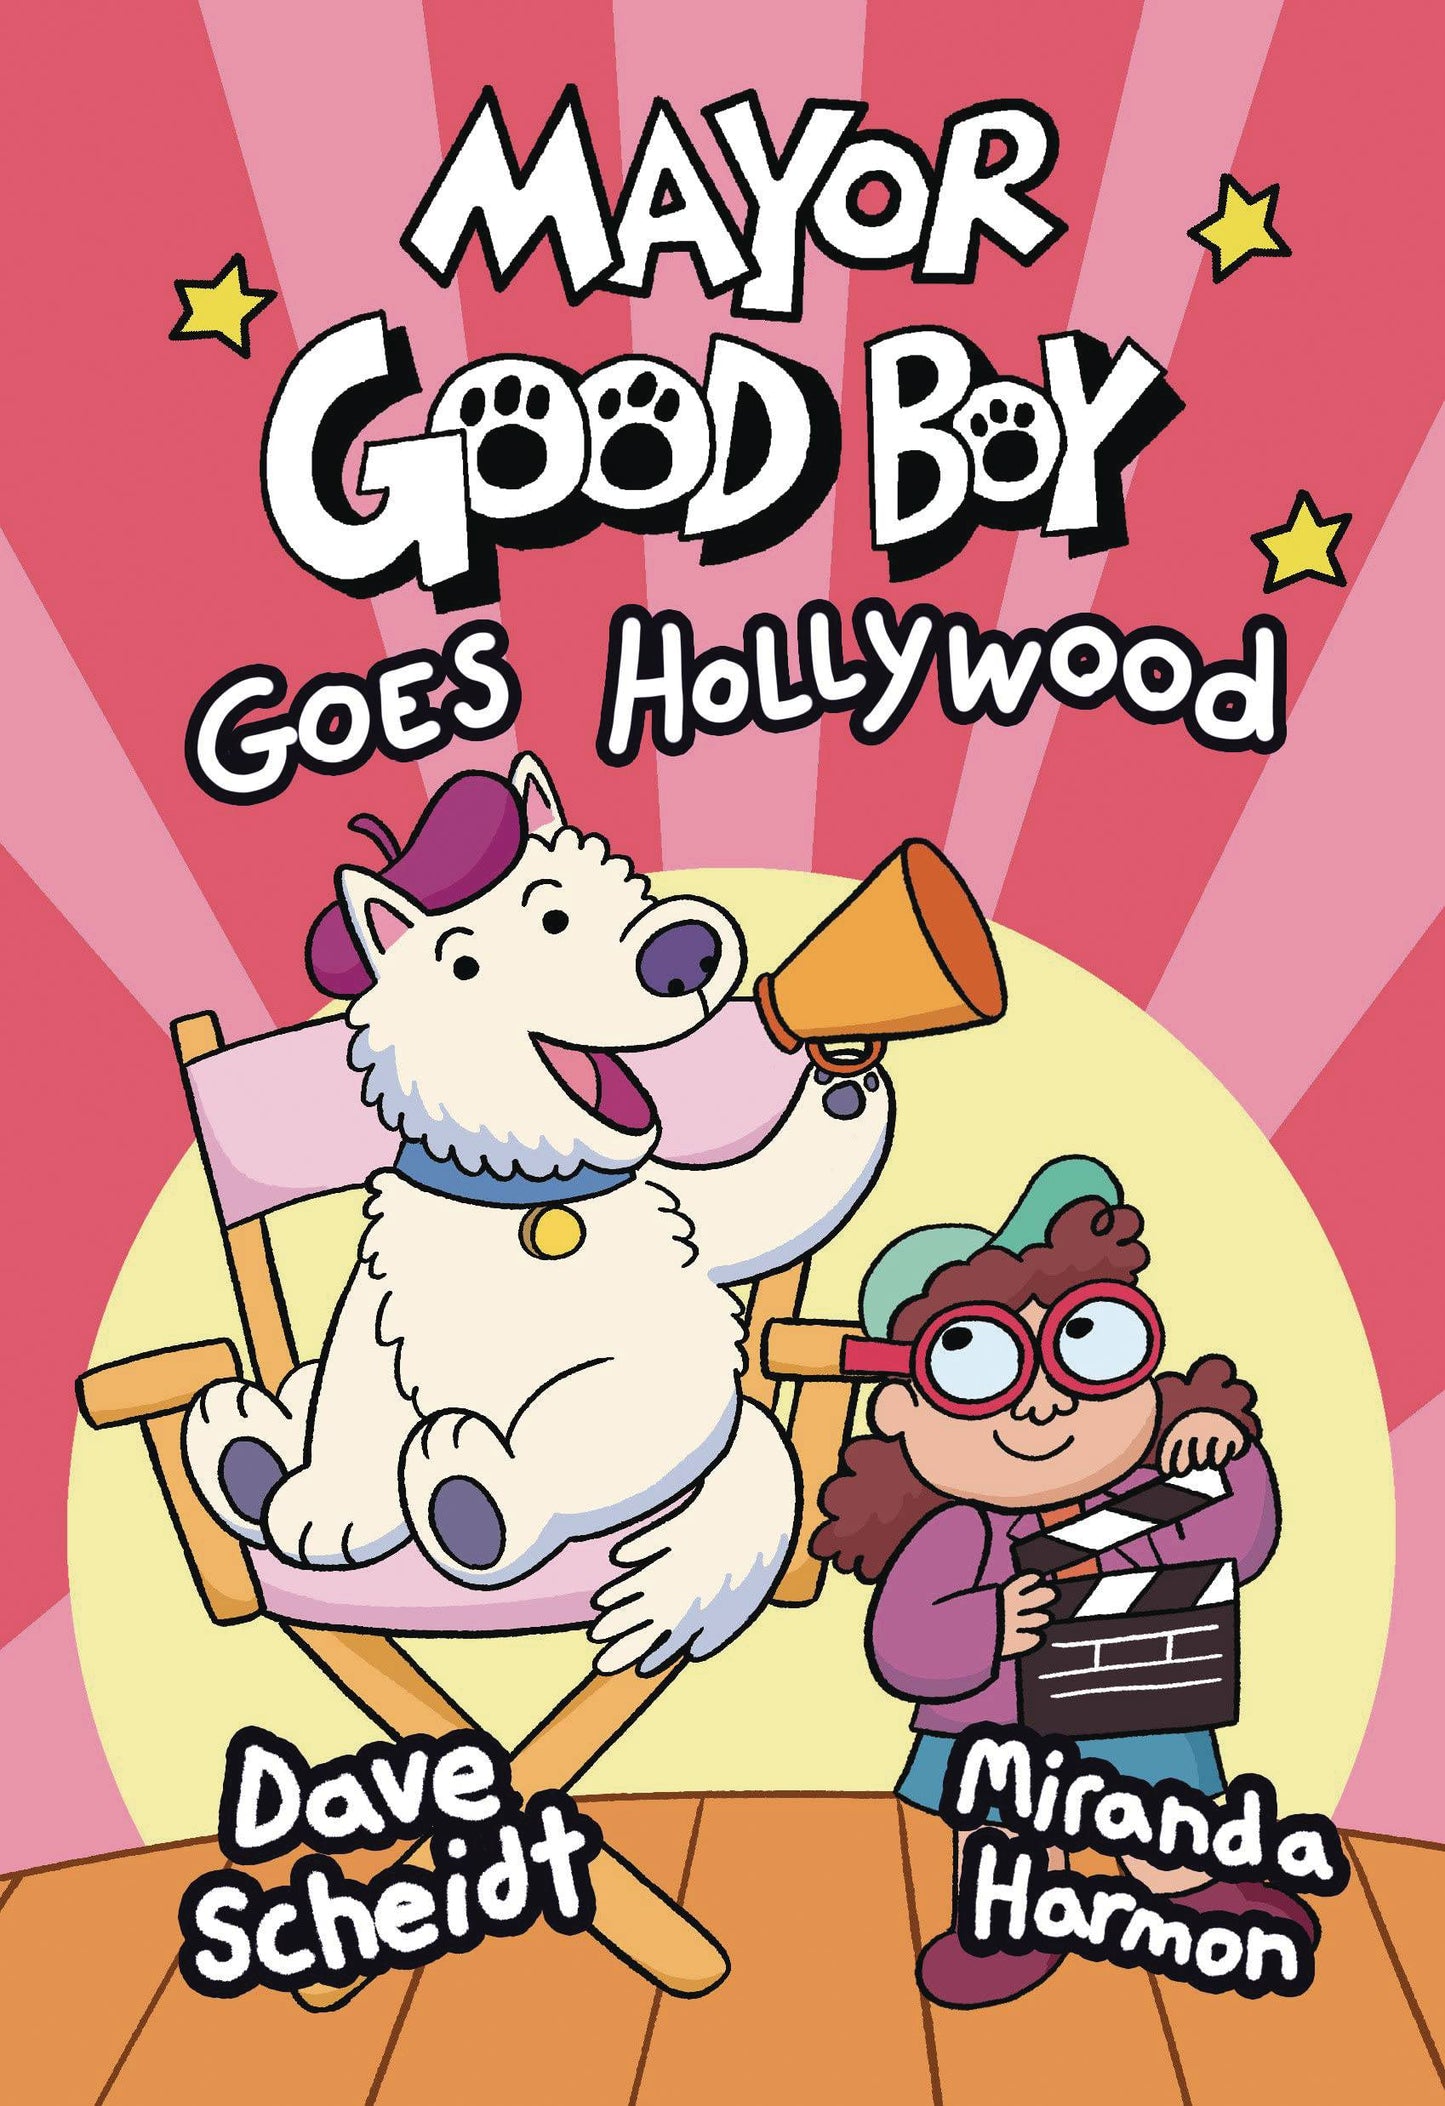 The One Stop Shop Comics & Games Mayor Good Boy Gn Vol 02 Goes Hollywood (C: 0-1-1) (09/21/2022) RANDOM HOUSE GRAPHIC